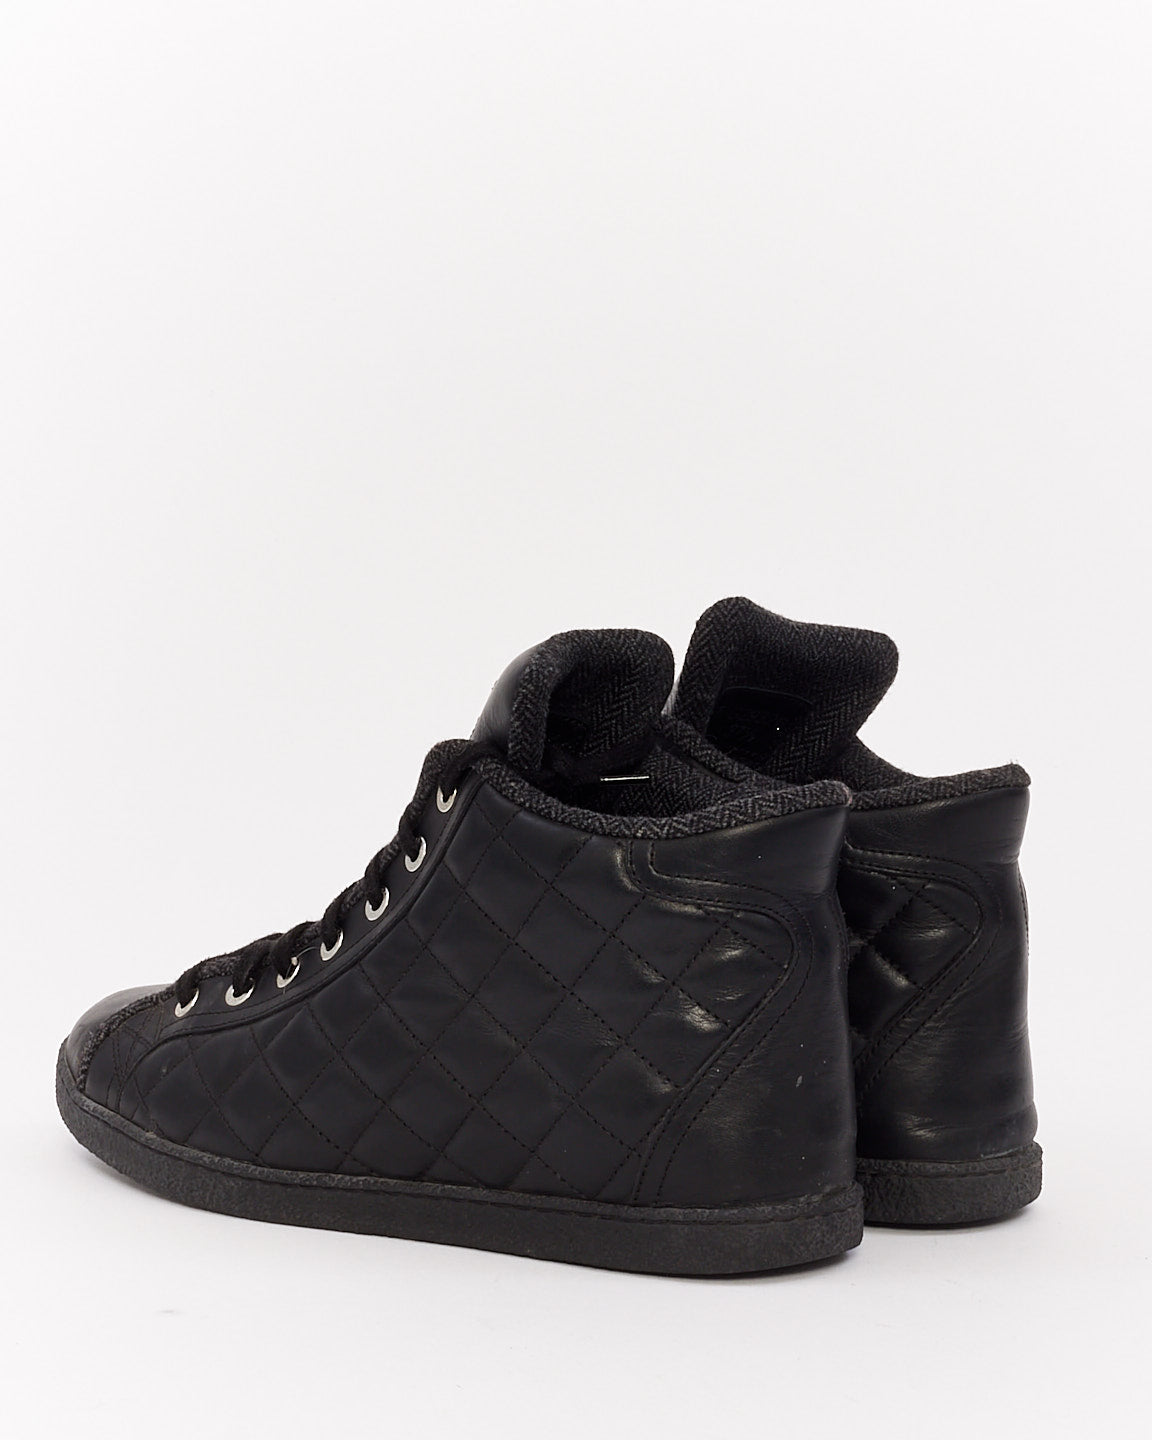 Chanel Black Quilted Lambskin Leather High Top Sneakers - 37.5